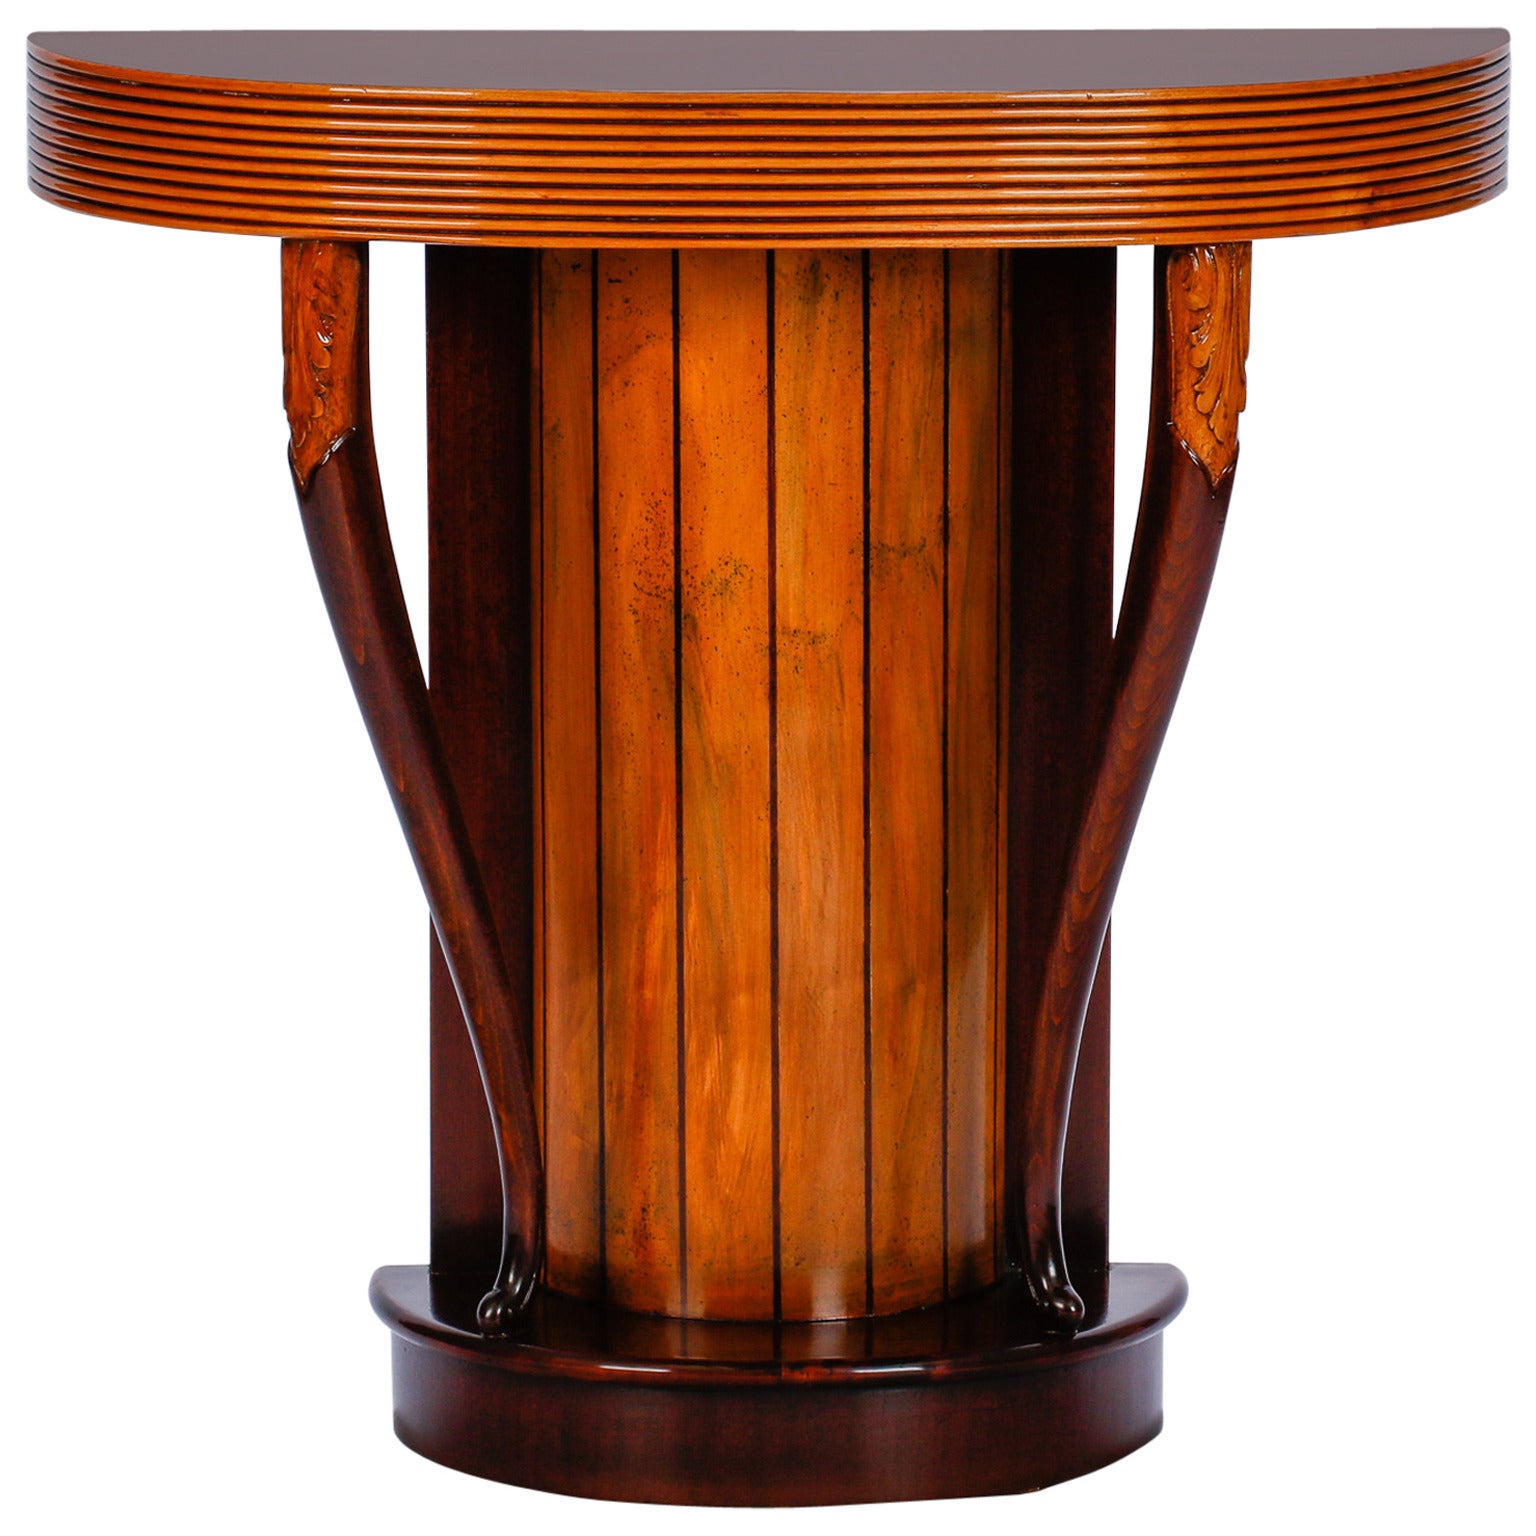 Art Deco Demilune Console with Reeded Edge